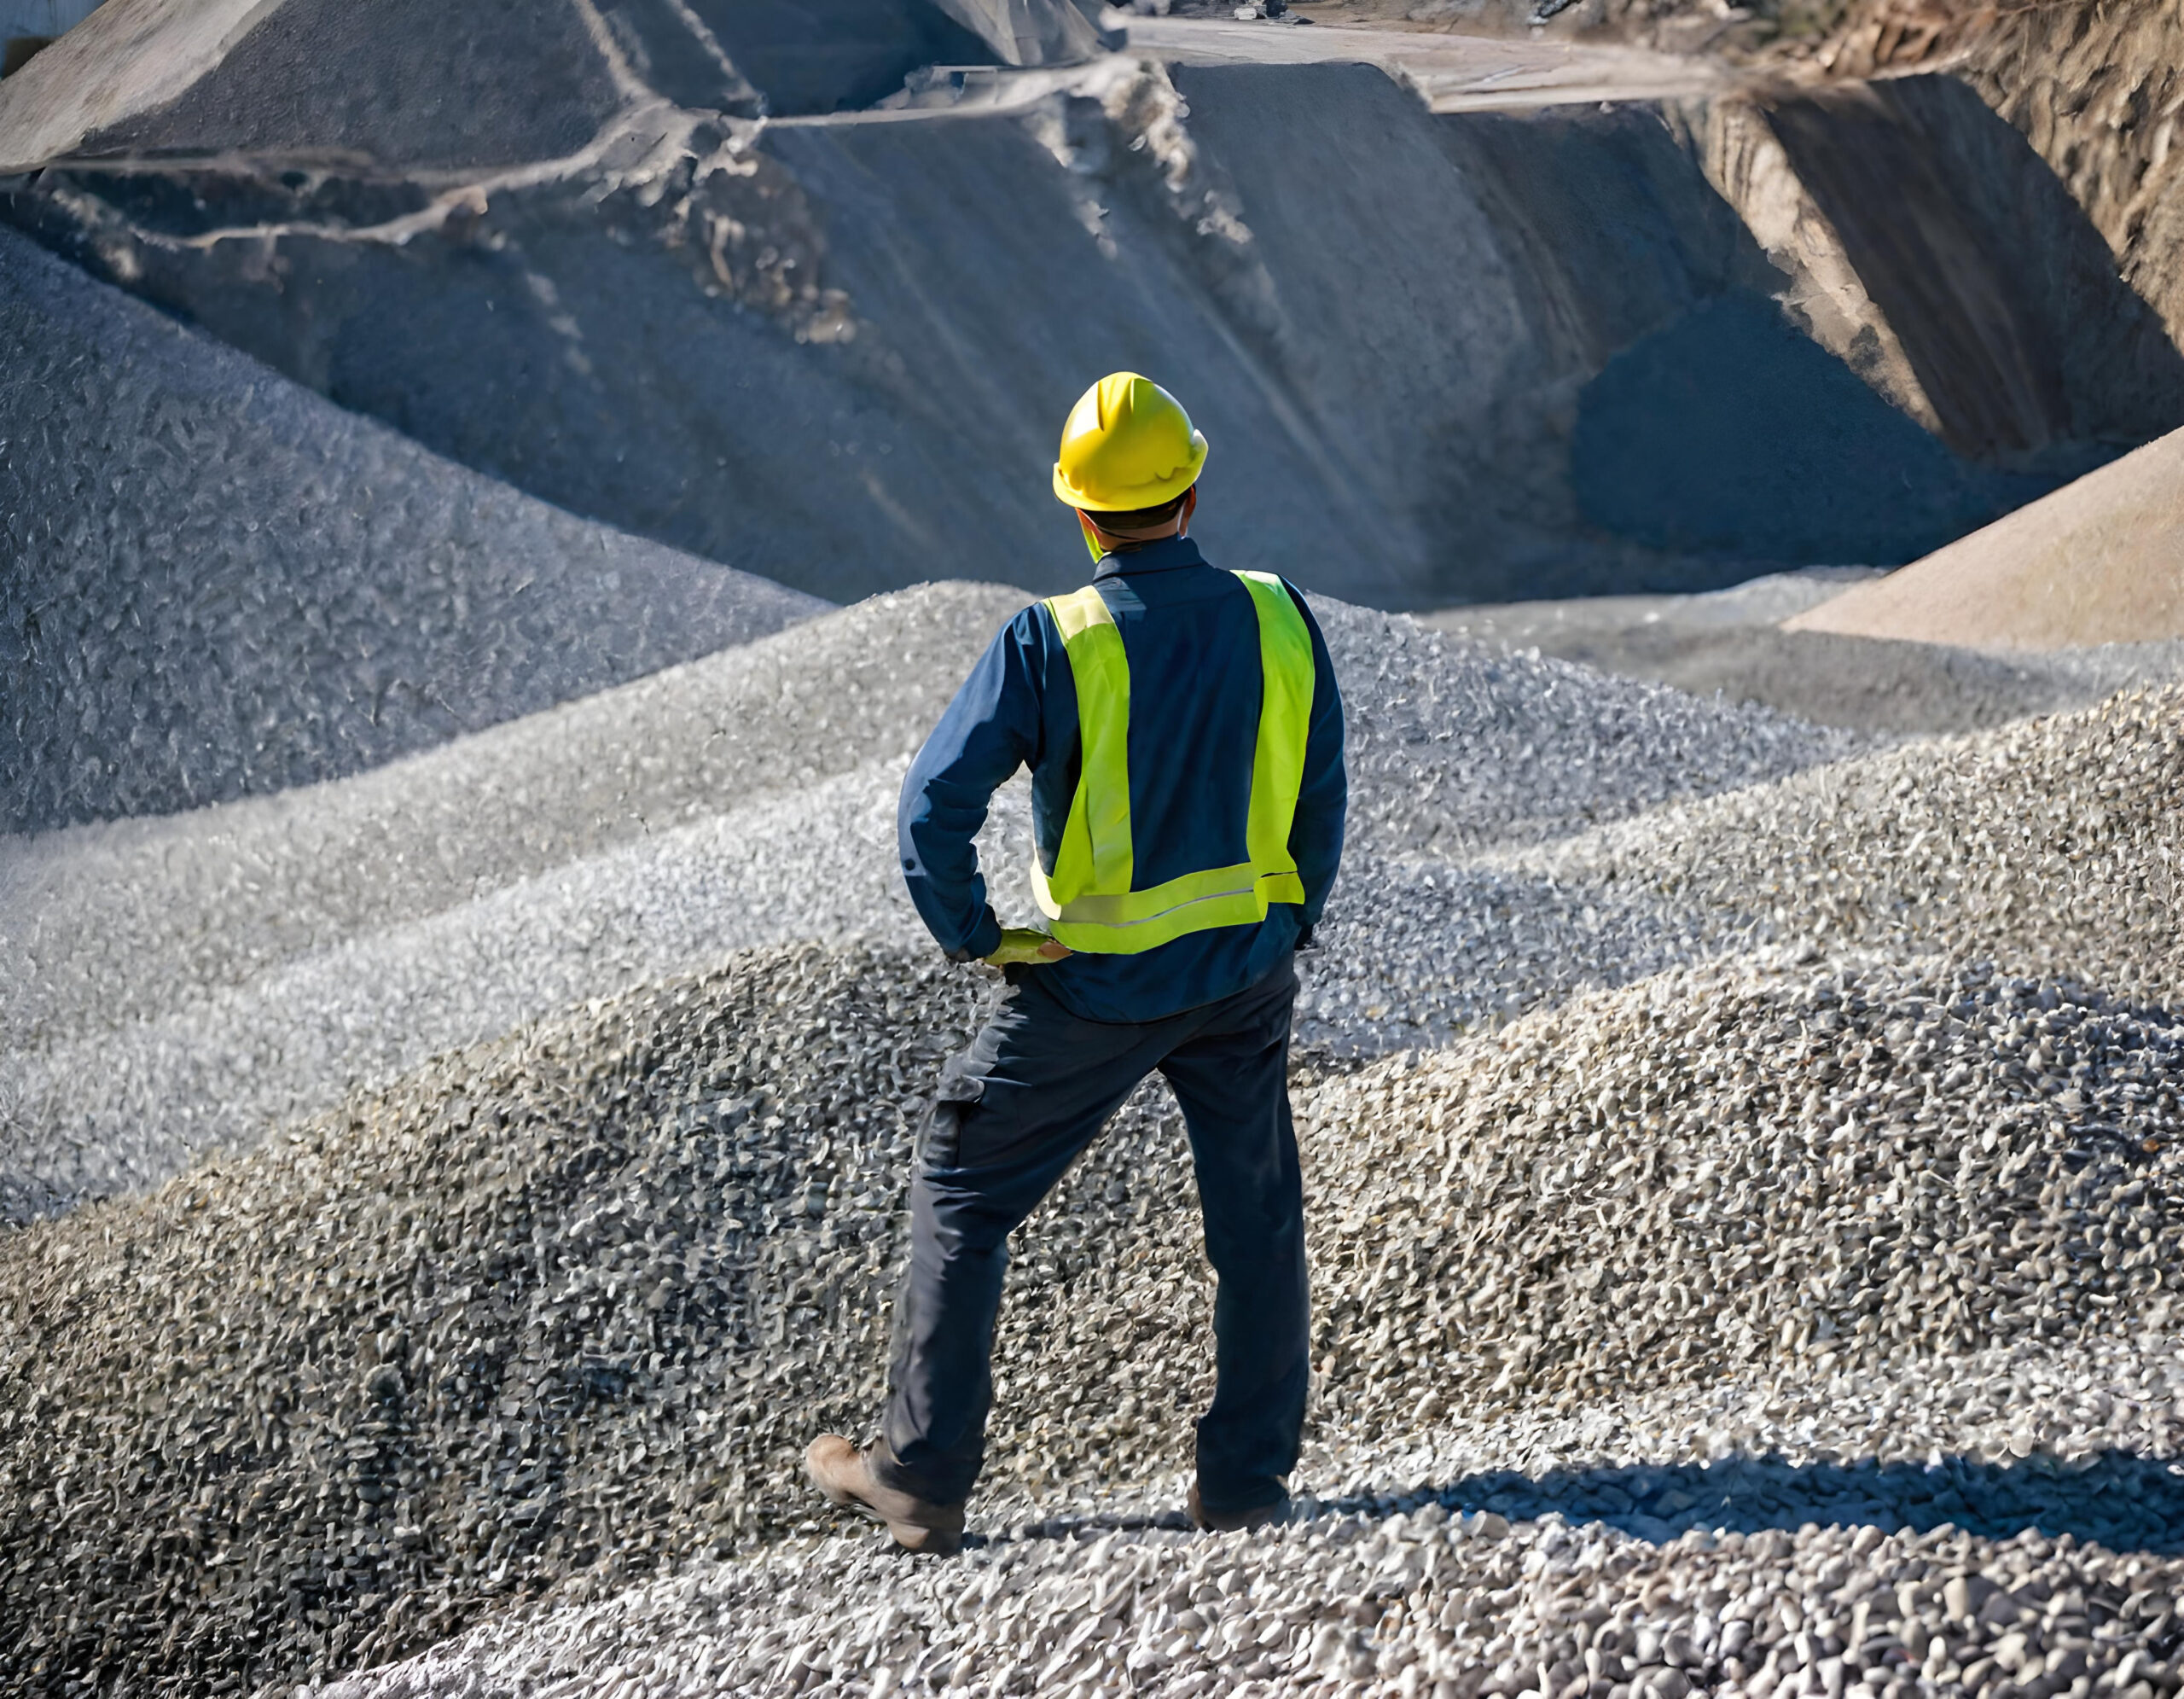 miner looks out over a field of common construction aggregates